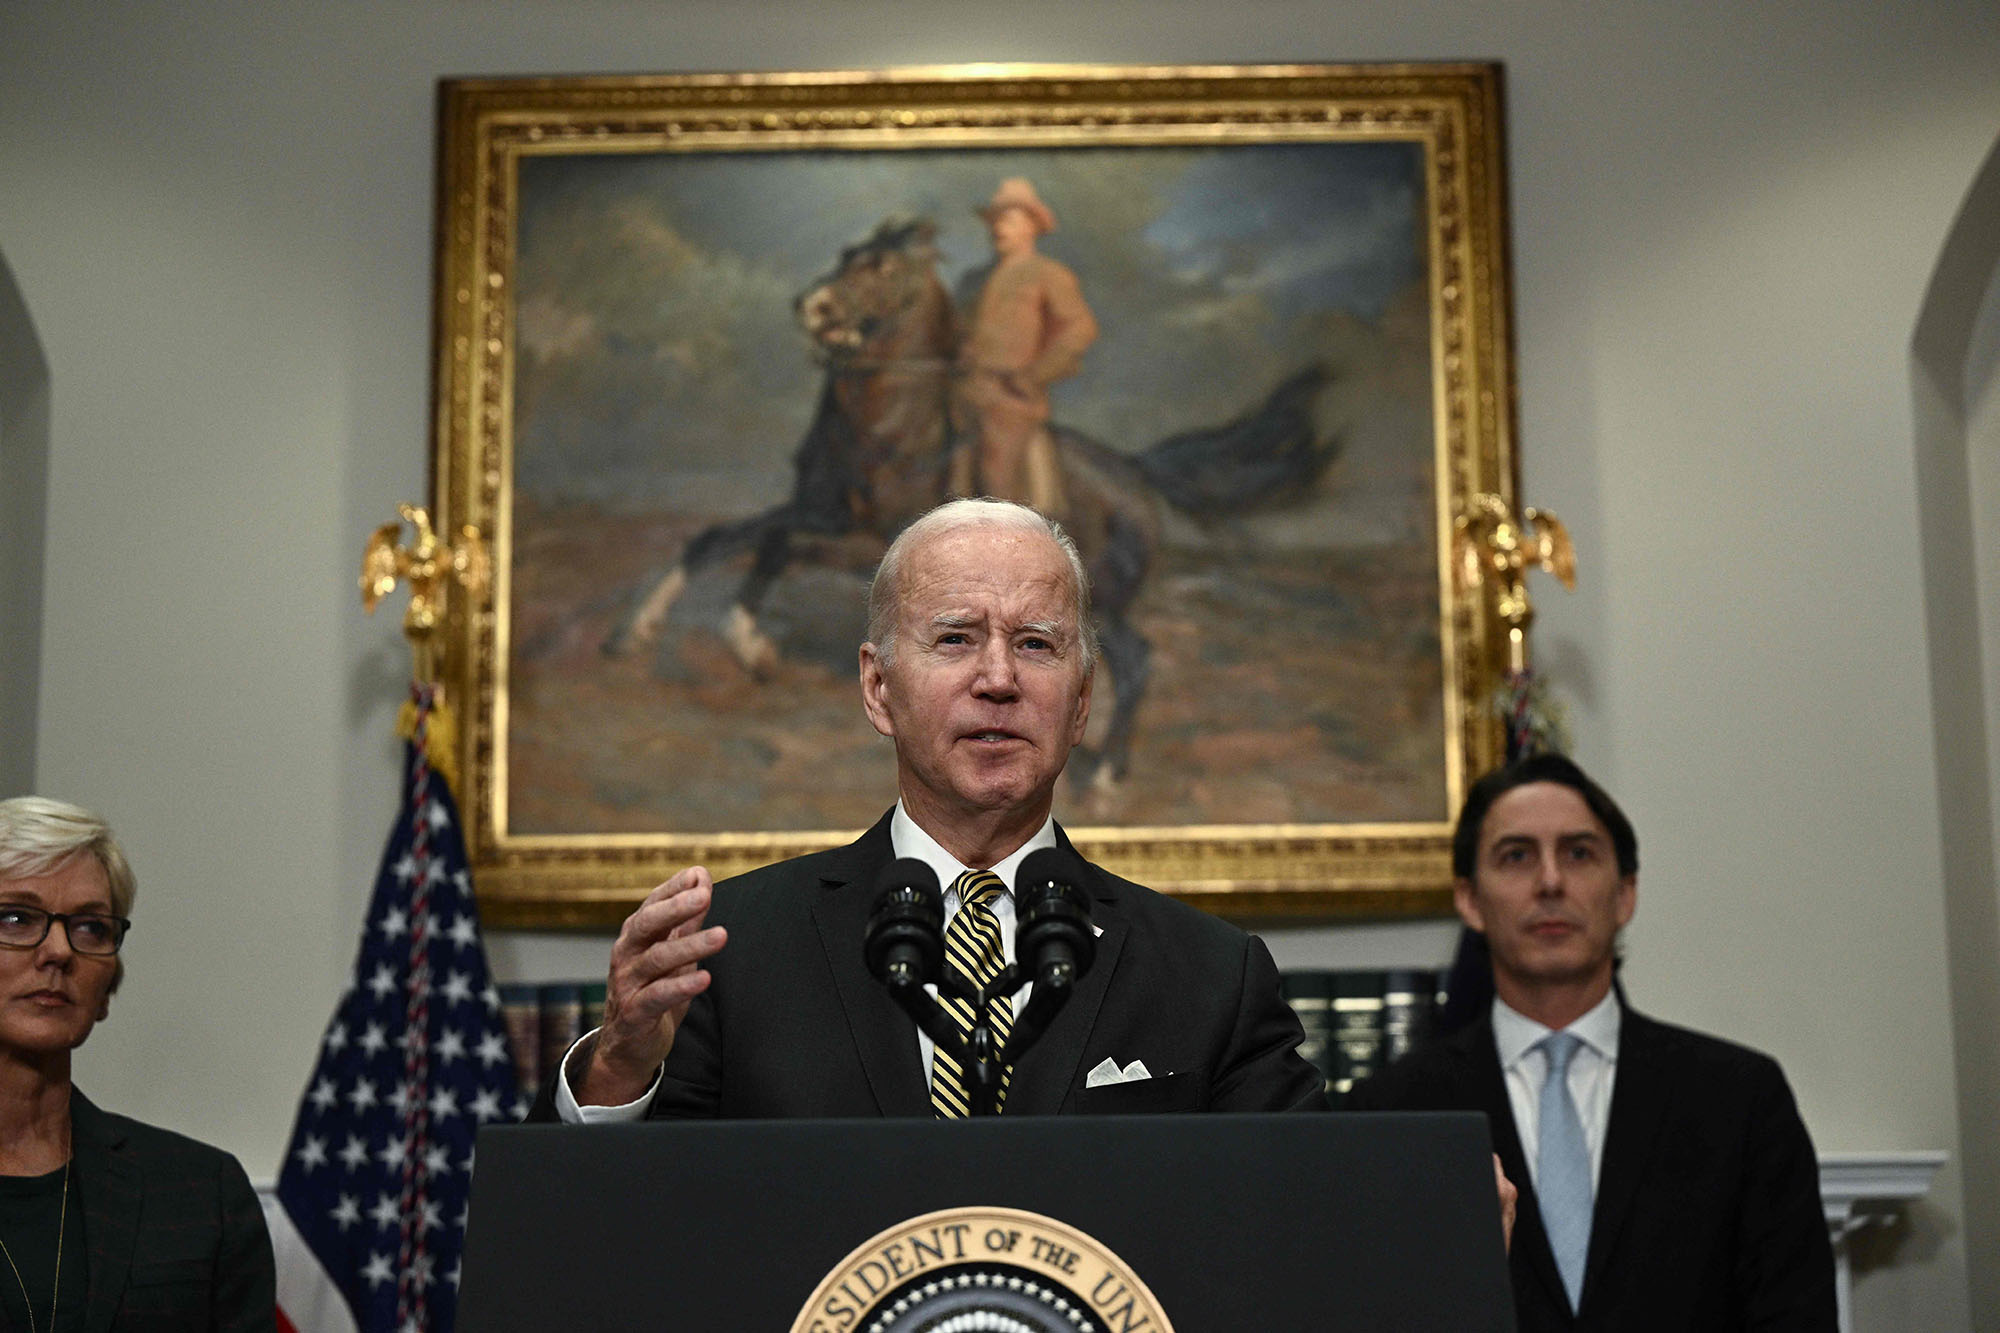 PHOTO: President Joe Biden speaks about energy security and lowering cost in the Roosevelt Room of the White House, Oct. 19, 2022.